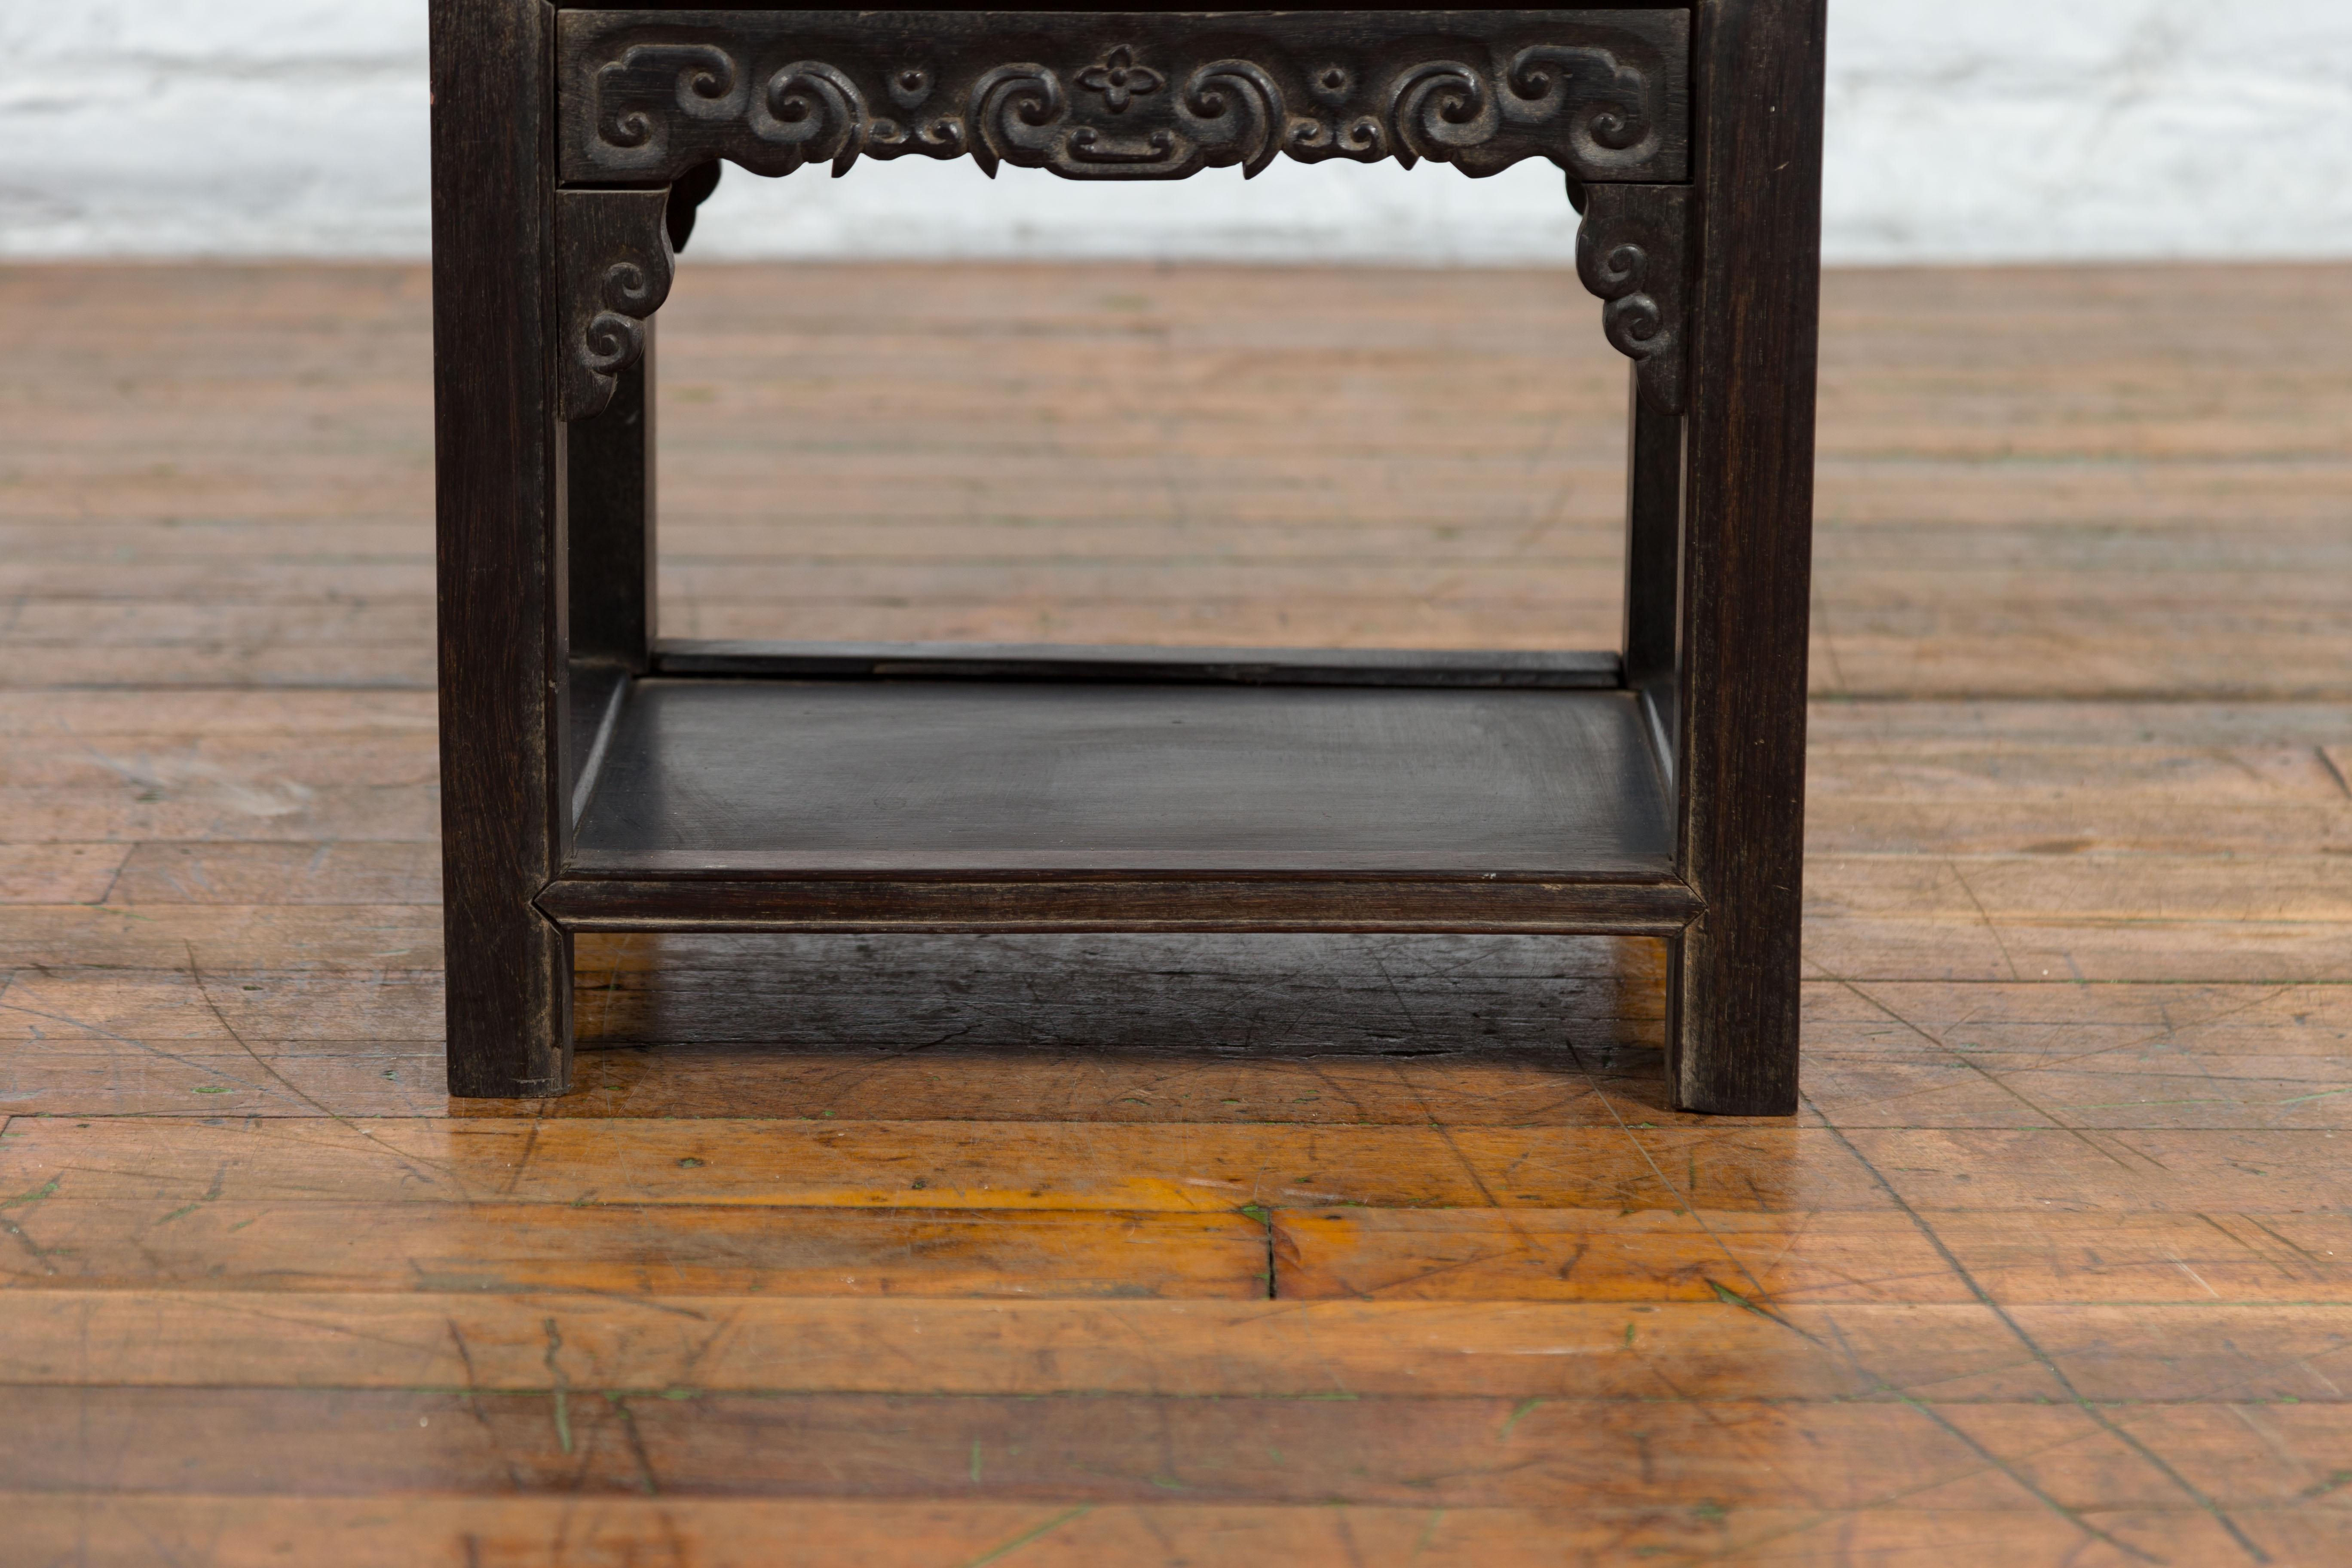 Chinese Late Qing Dynasty 1900s Stool with Cloud-Carved Apron and Lower Shelf For Sale 4